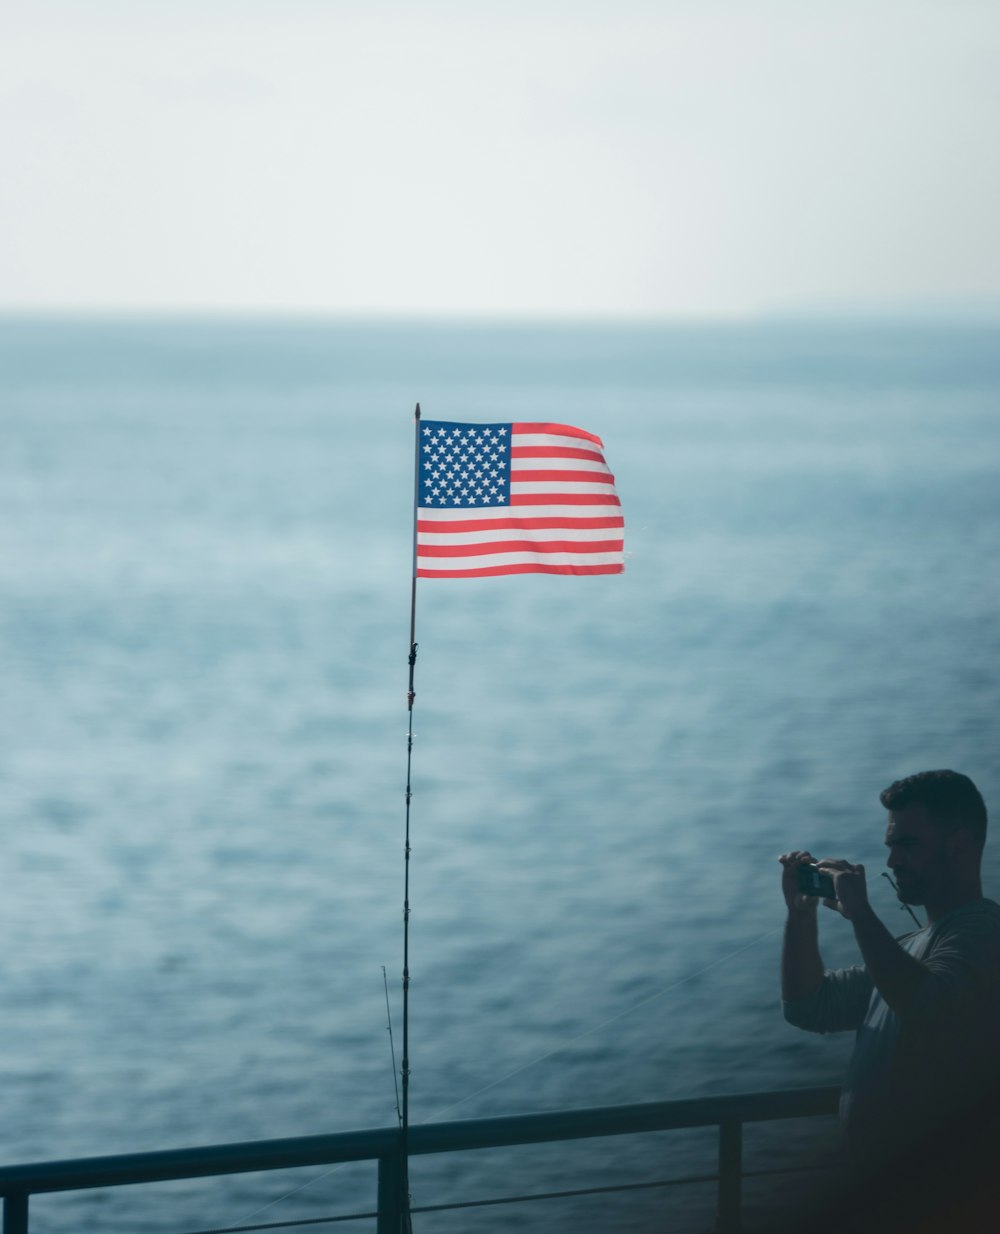 man standing while taking photo near railings viewing body of water and waving United States of America flag